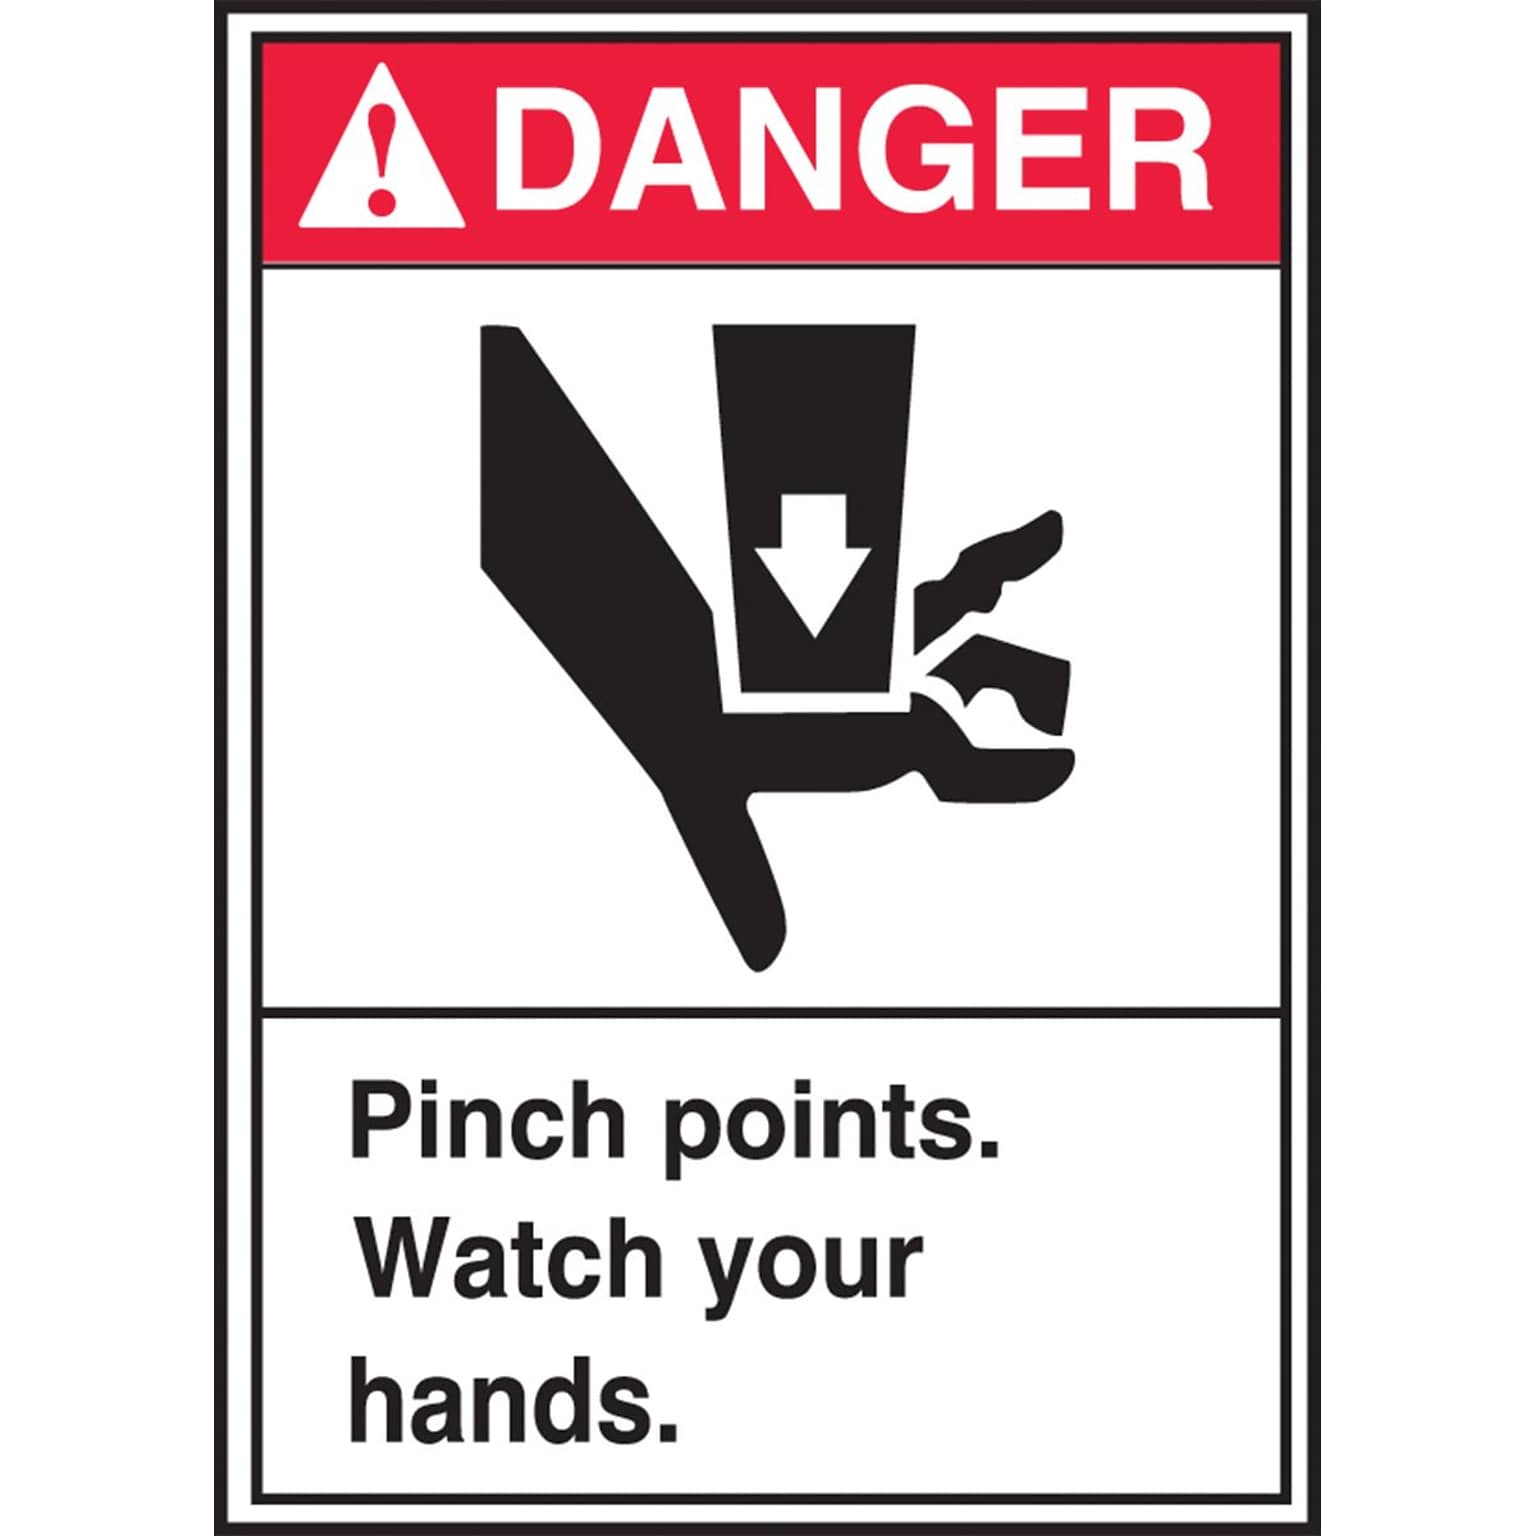 Accuform Safety Label, DANGER PINCH POINTS WATCH YOUR HANDS, 5 x 3 1/2, Adhesive Vinyl, 5/Pack (LEQM013VSP)